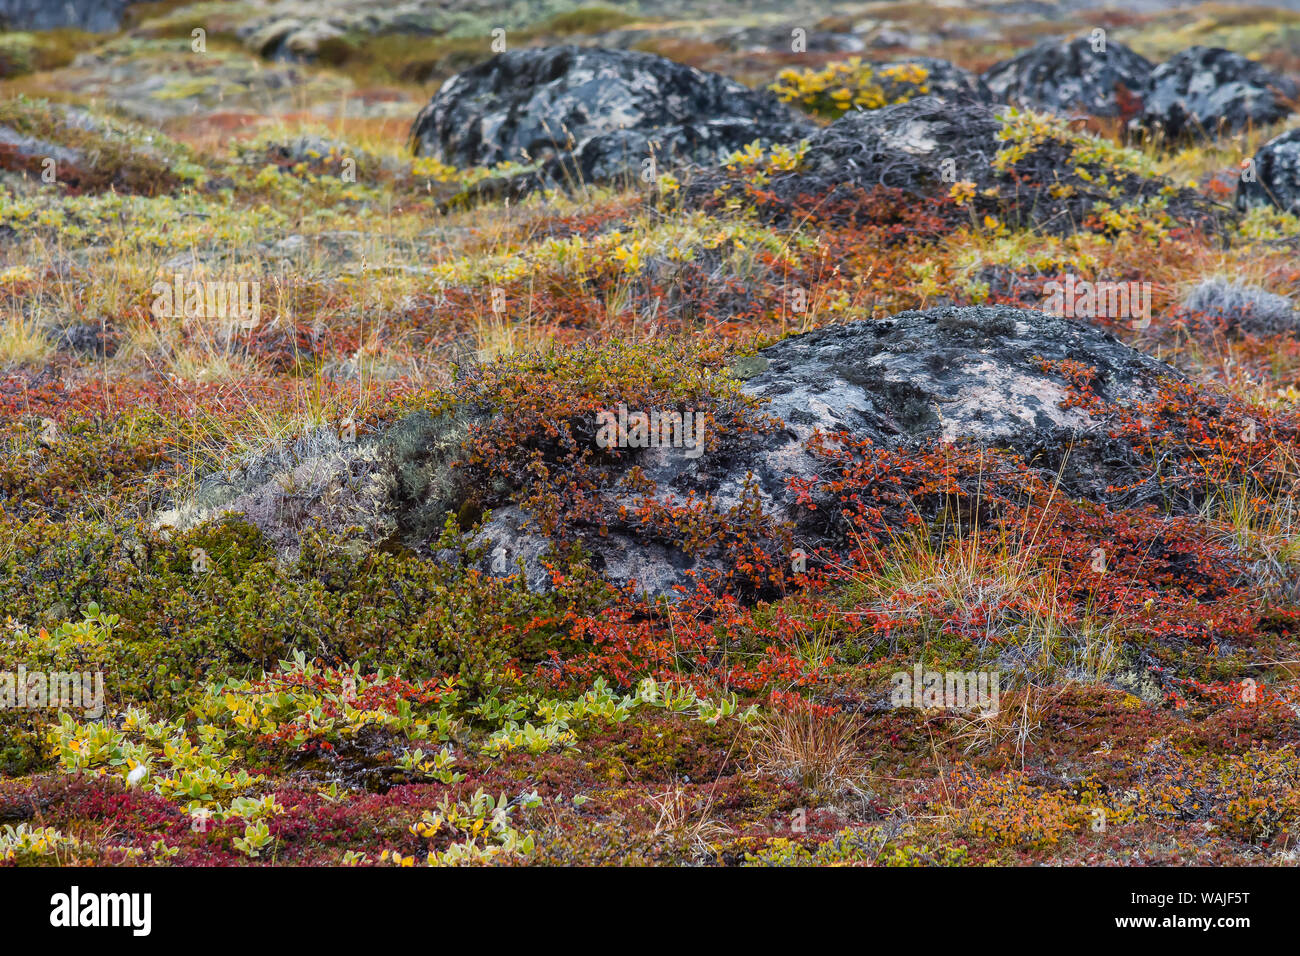 Greenland. Eqip Sermia. Rocks covered in dwarf birch and willow in autumn color. Stock Photo